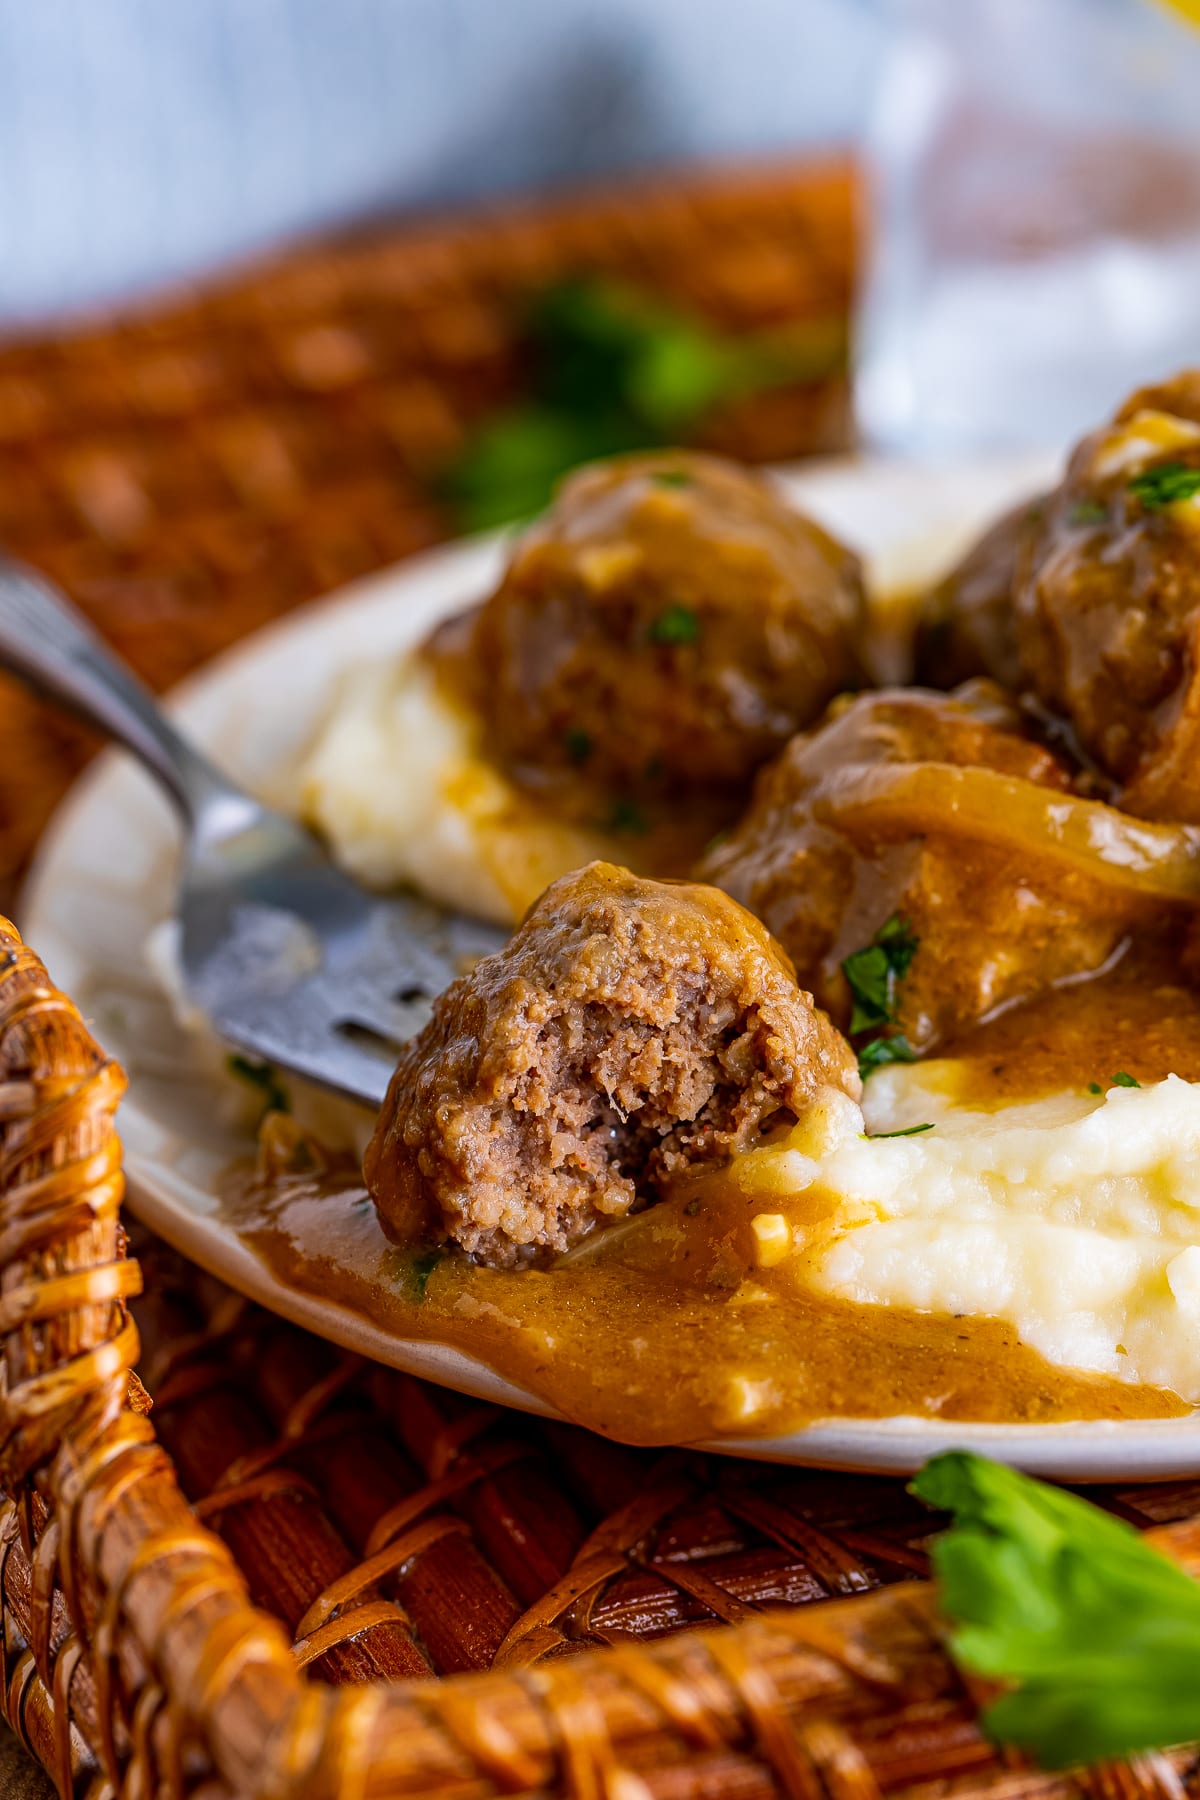 Close up interior shot of a bite of Meatballs and Gravy on a white plate over mashed potatoes. Plate is sitting on a wicker tray with light blue linen and parsley.